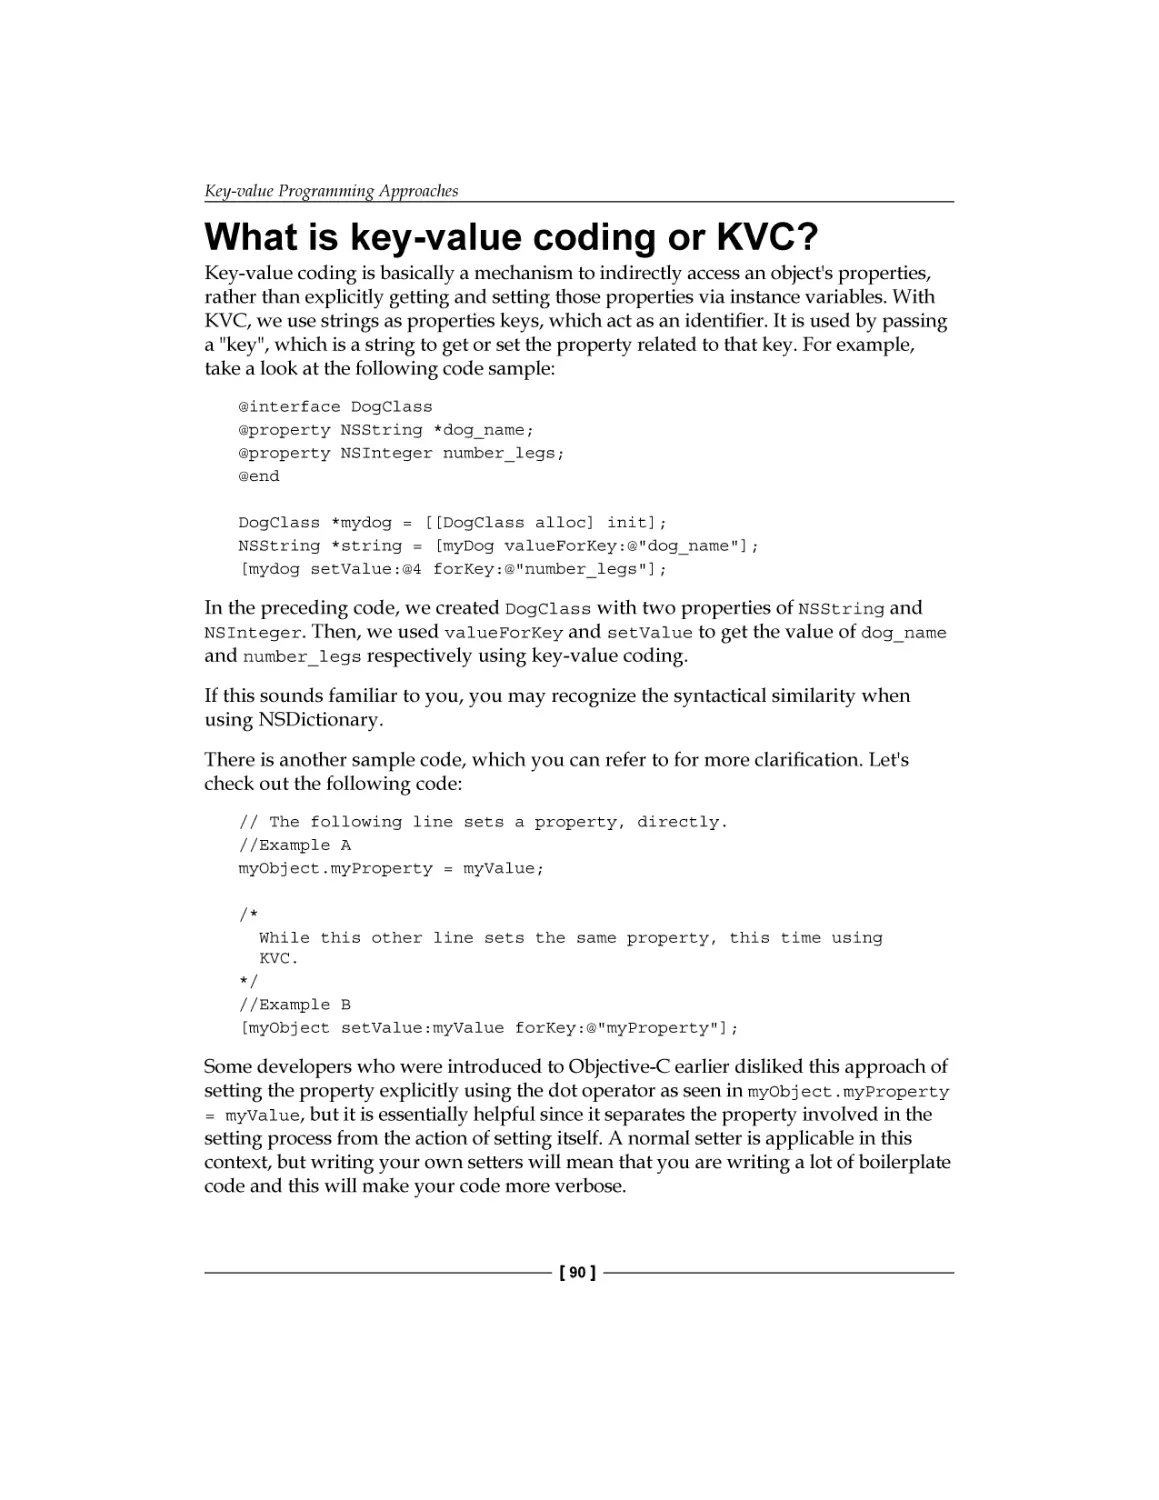 What is key-value coding or KVC?